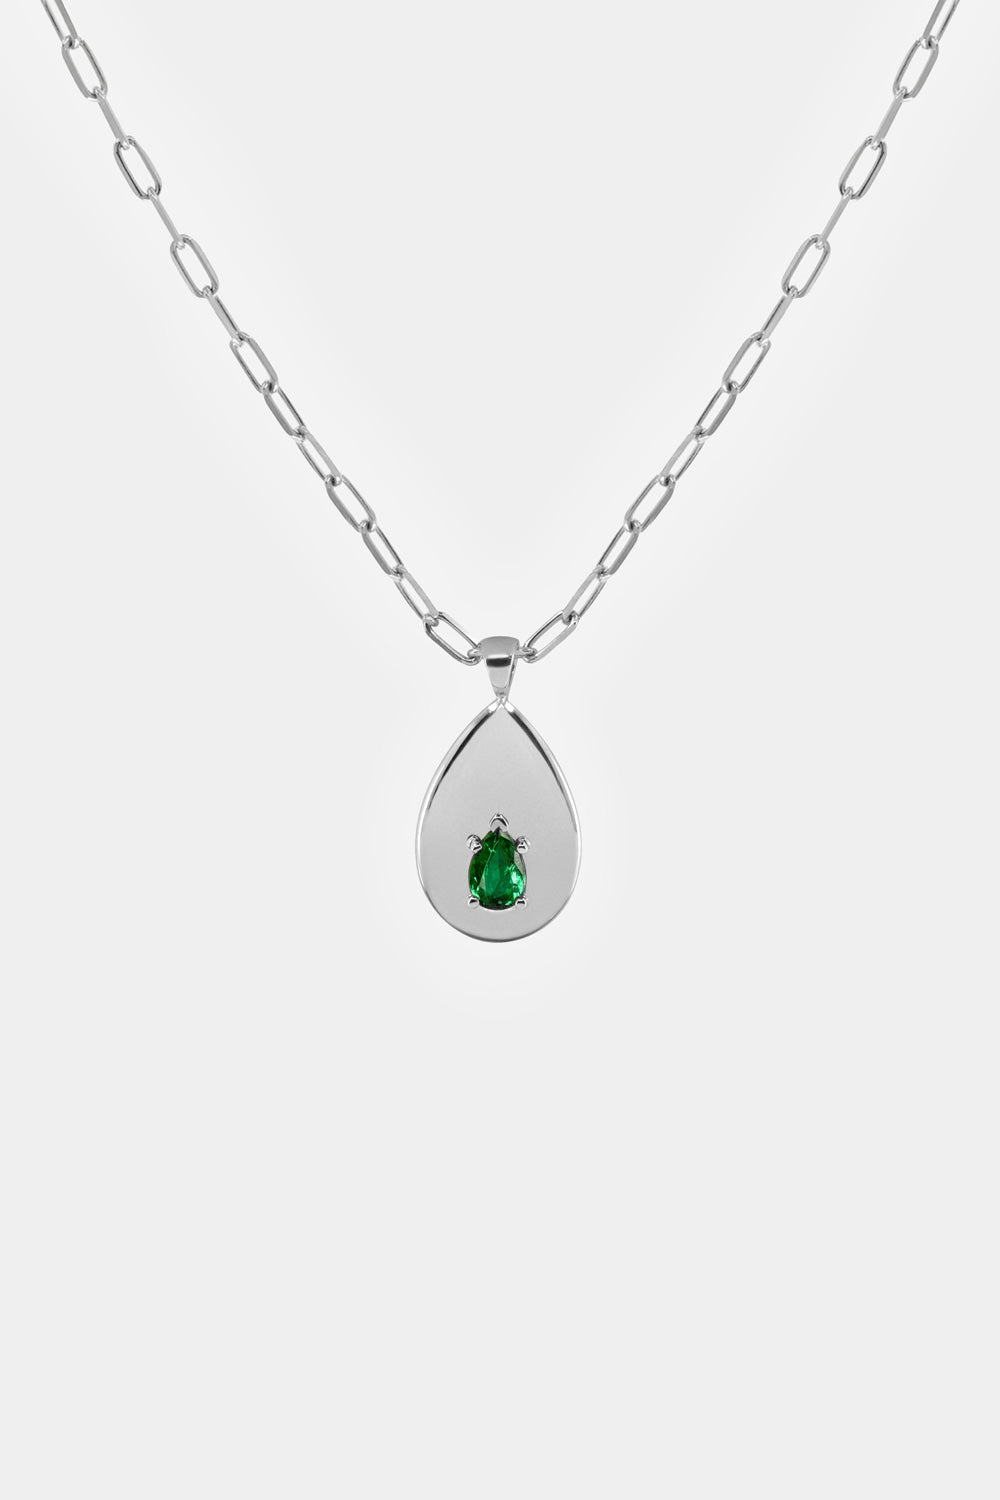 Emerald and Diamond Pendant - High Quality Emerald — Your Most Trusted  Brand for Fine Jewelry & Custom Design in Yardley, PA